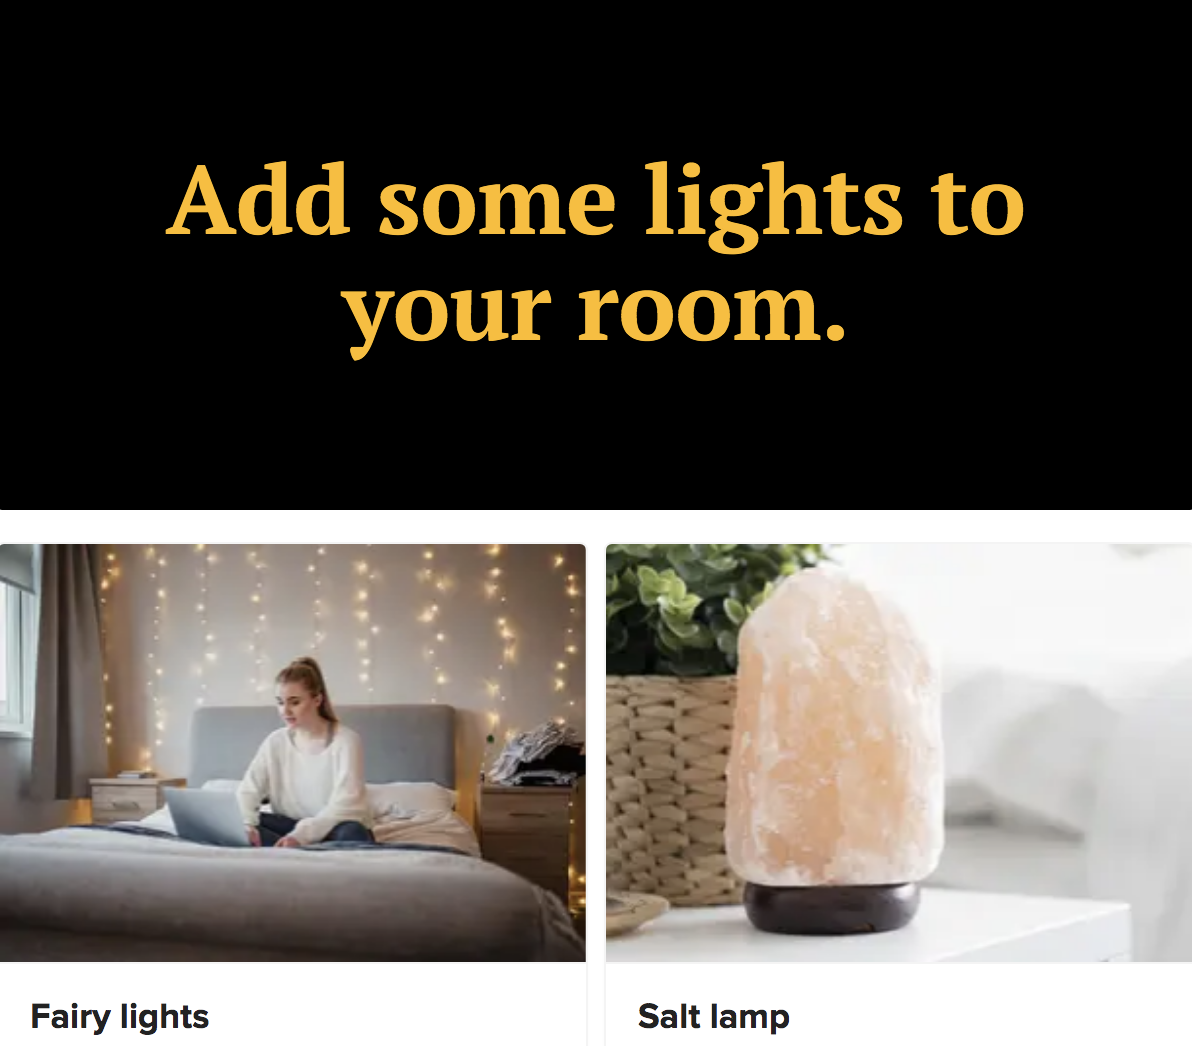 A quiz question asking what kind of lights you want to put in your dorm room, including fairy lights and salt lamps